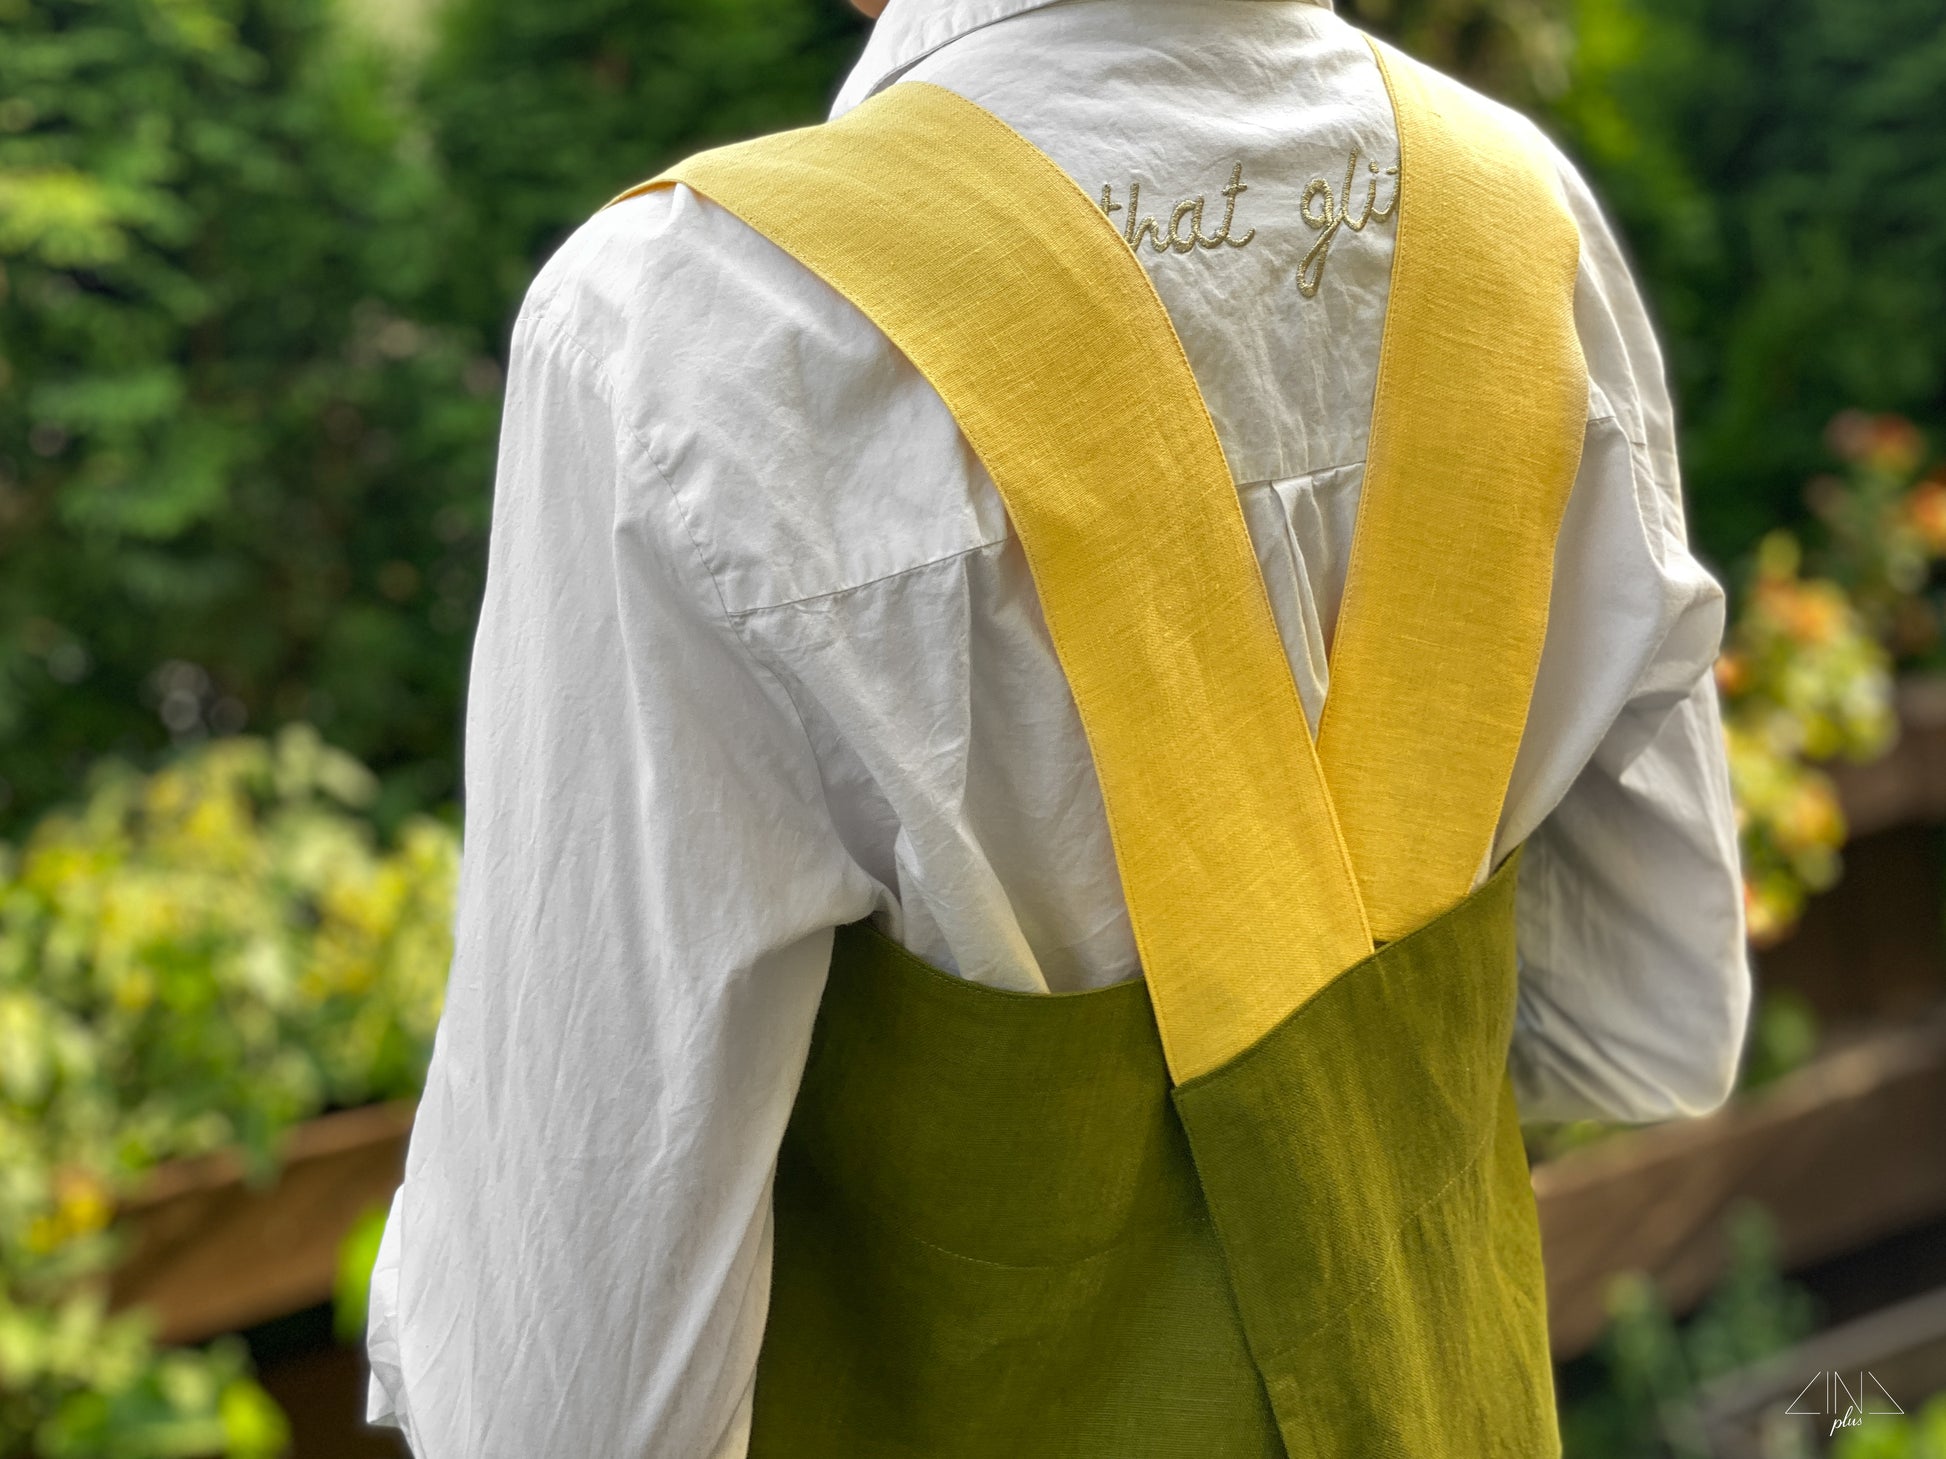 Bicolor Linen Pinafore Apron in Moss Green color with Yellow Pockets and Straps for gardening.